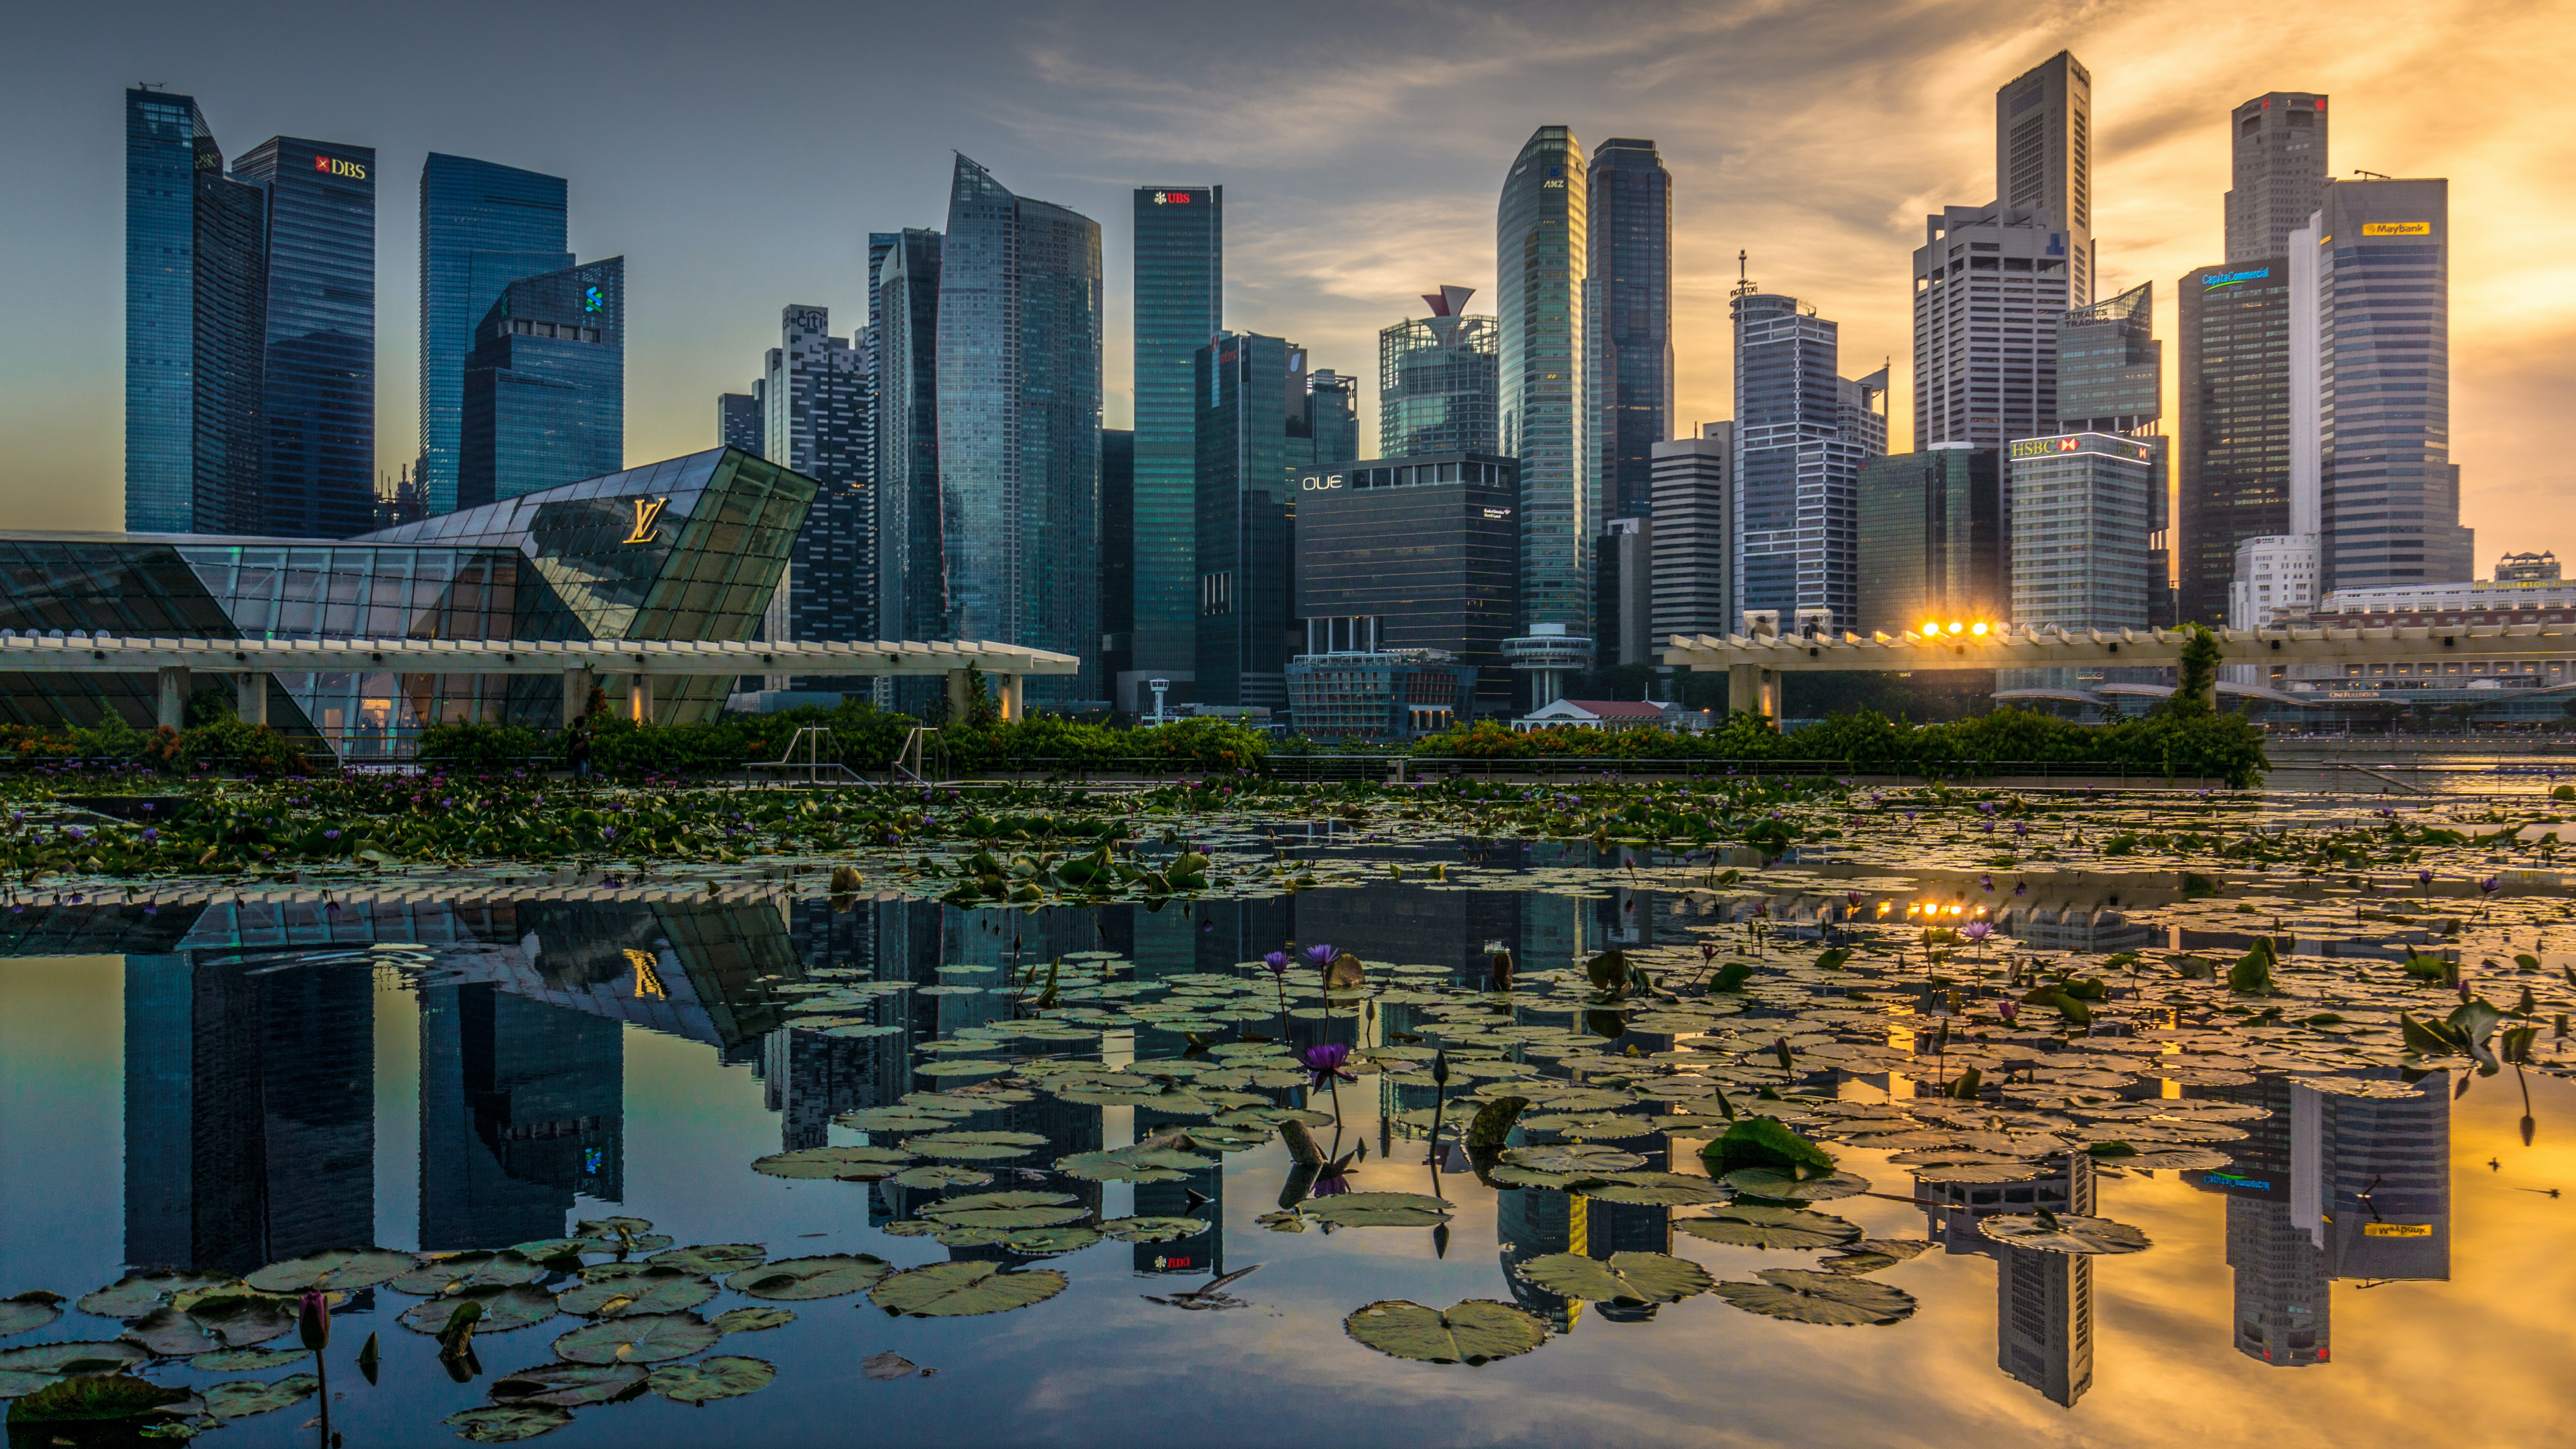 water lily, cities, architecture, city, building, reflection, skyscrapers 32K